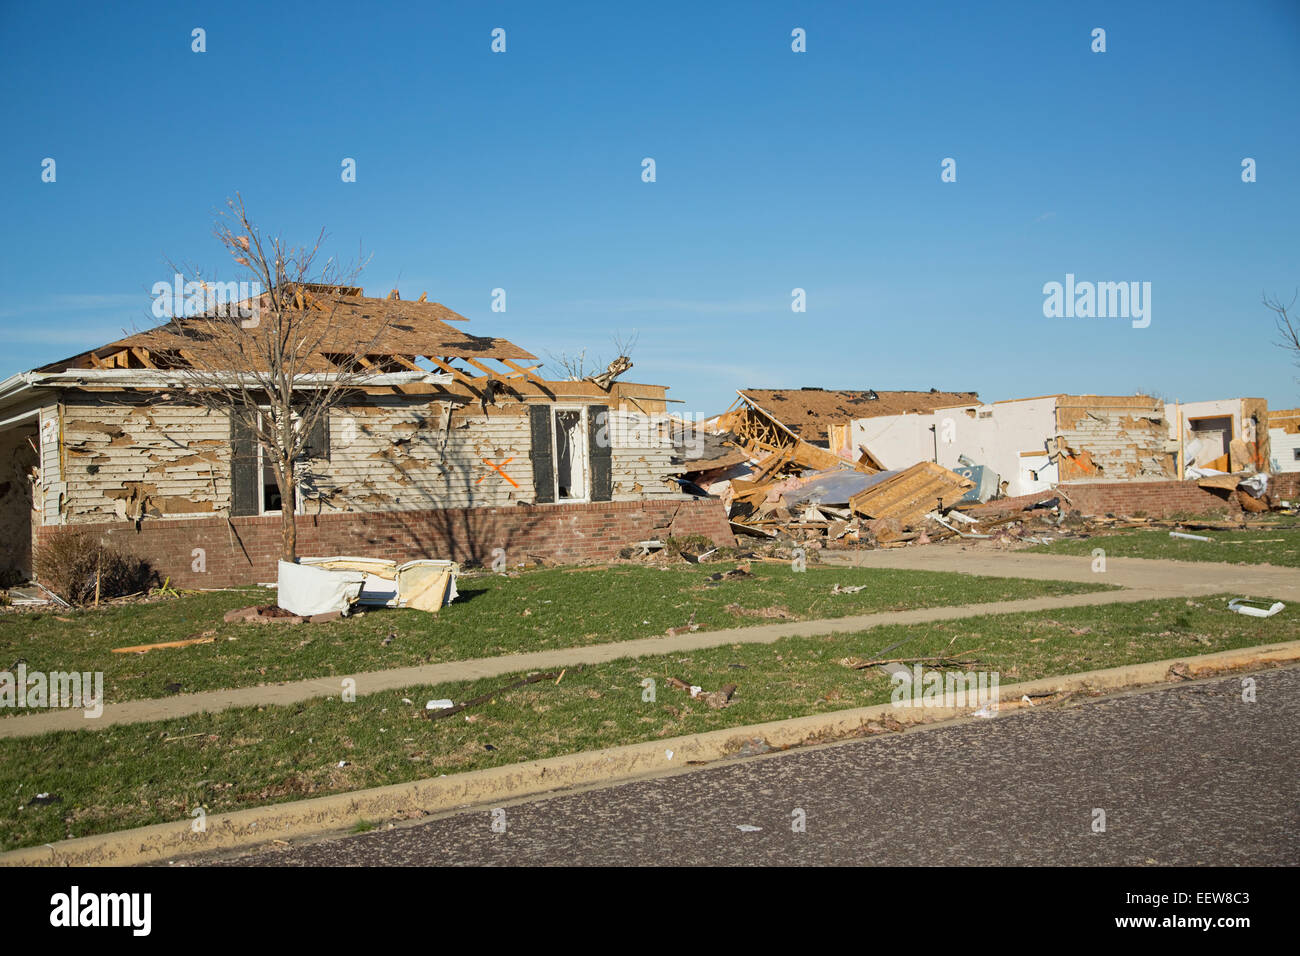 Ruined houses after tornado Stock Photo